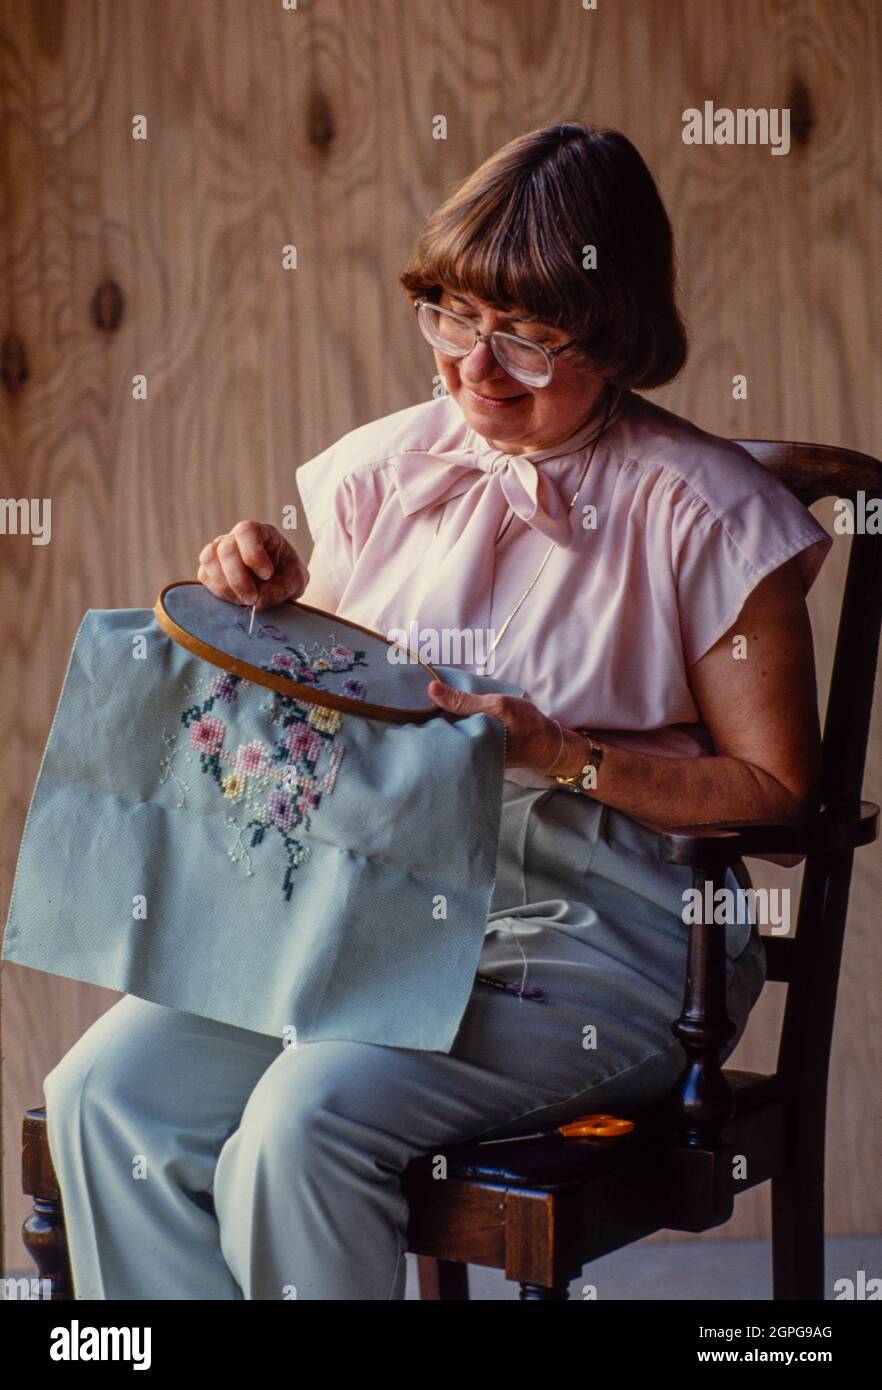 woman sewing embroidery using a hoop Stock Photo